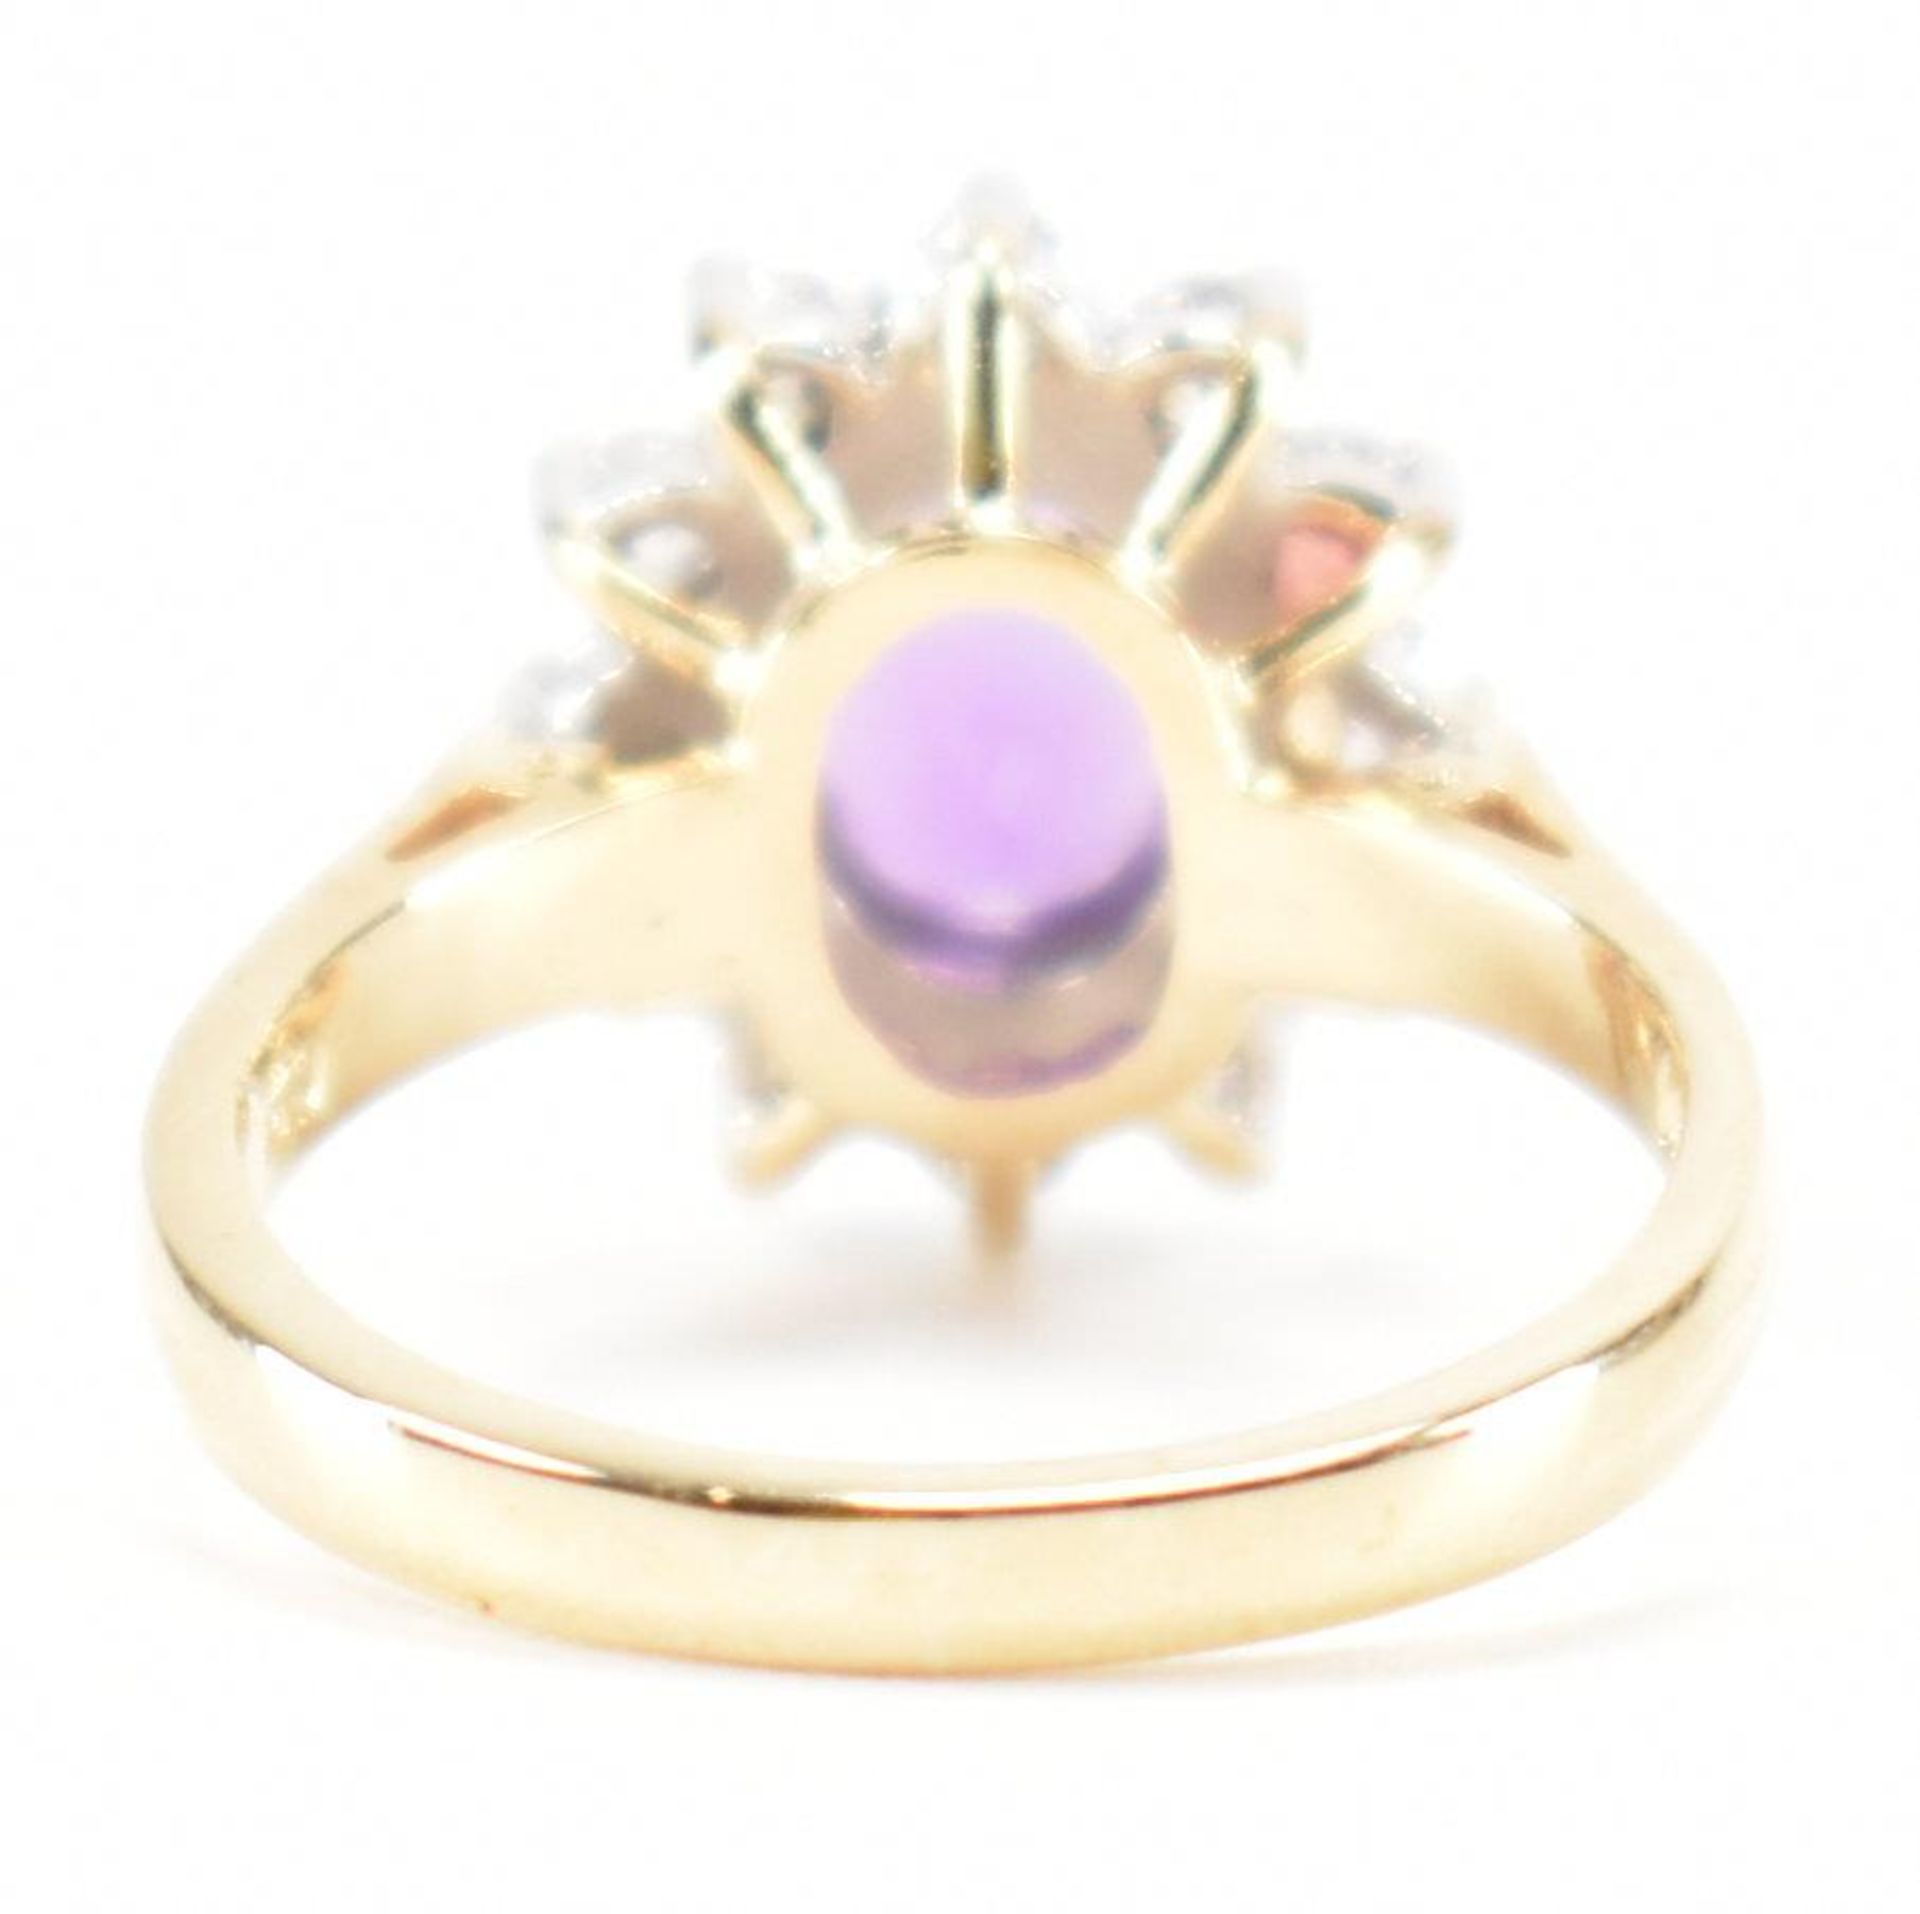 HALLMARKED 9CT GOLD AMETHYST & CZ CLUSTER RING - Image 4 of 8